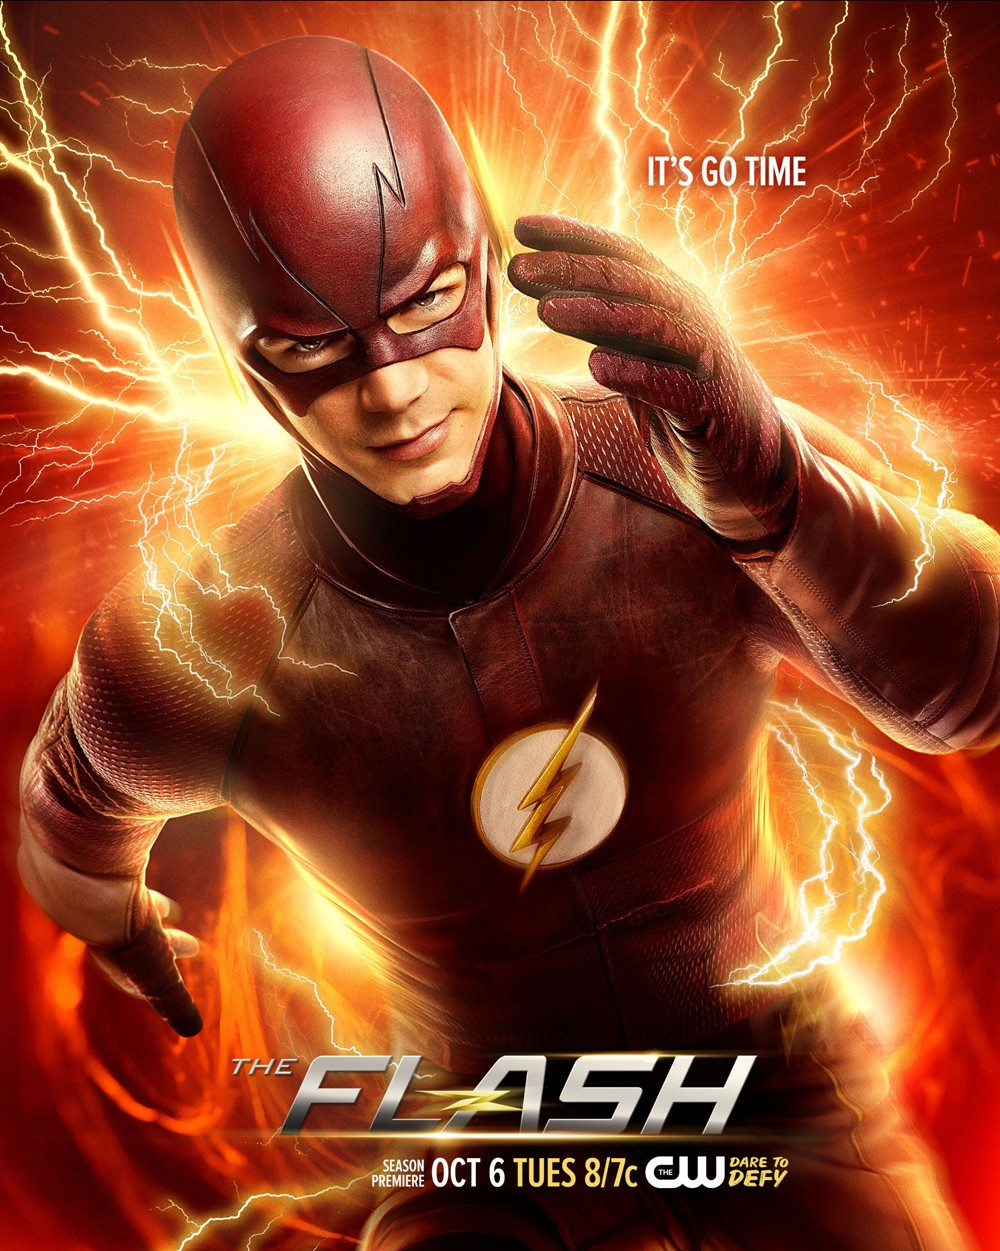 Imagen The Flash season 2 poster It's Go Time.png The Flash